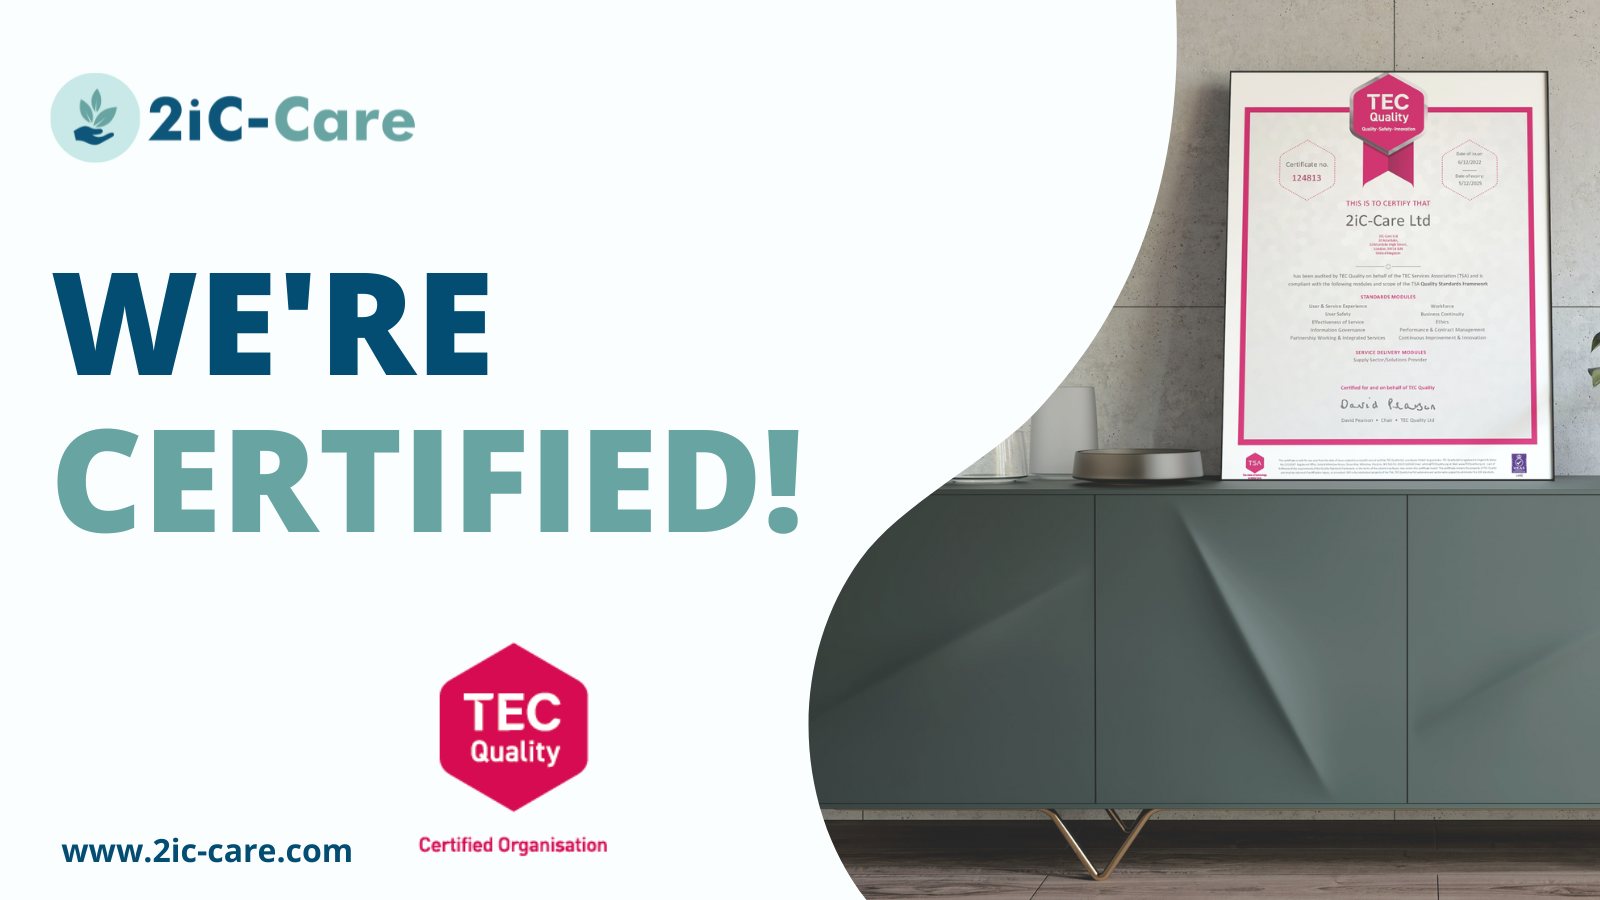 Announcement: 2iC-Care is now a QSF Certified Organisation.